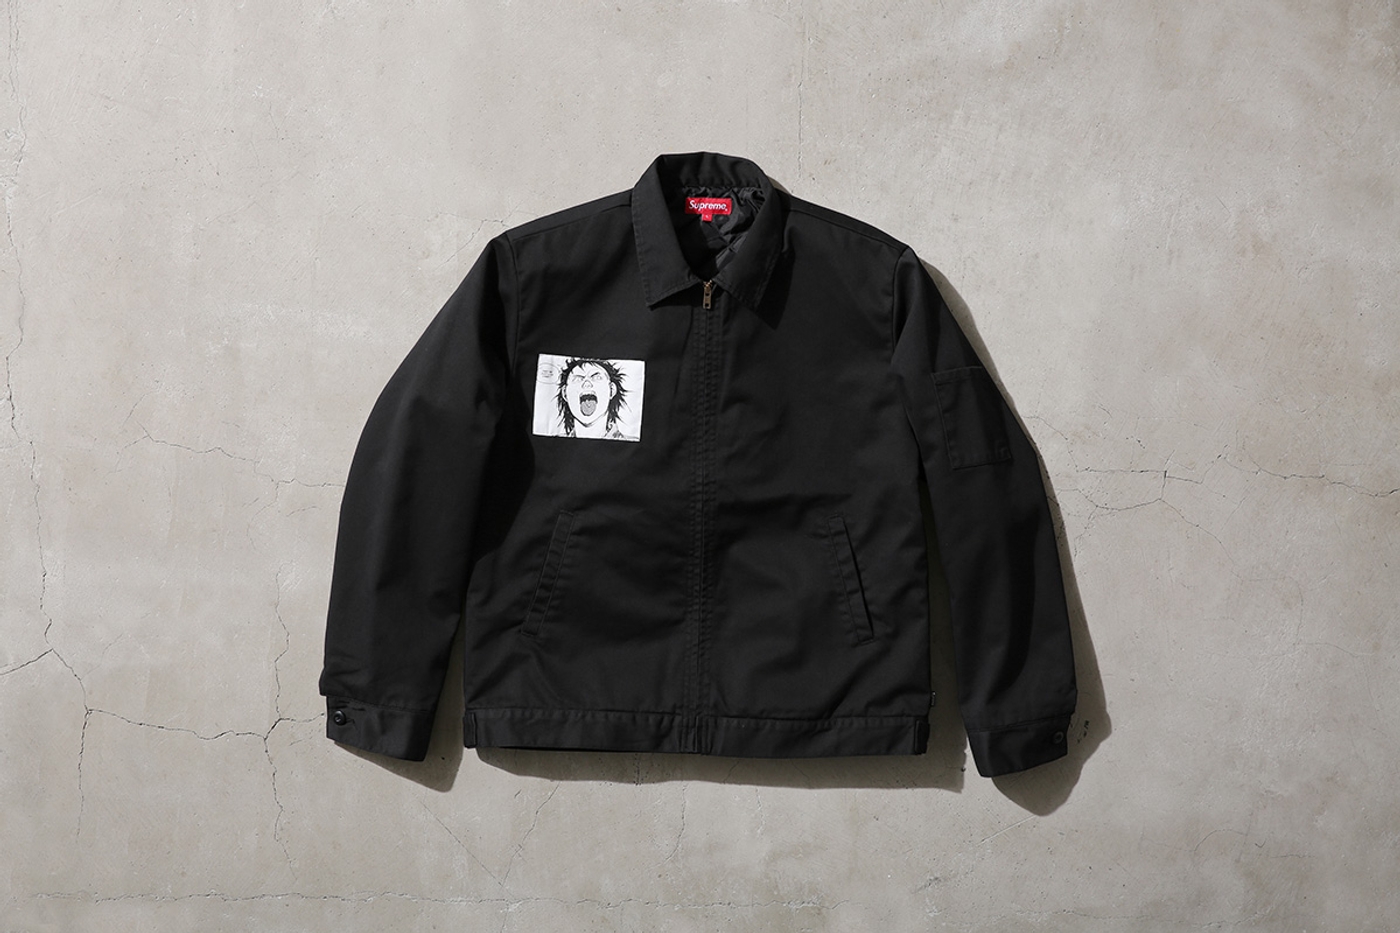 Work Jacket with woven patches. (15/40)